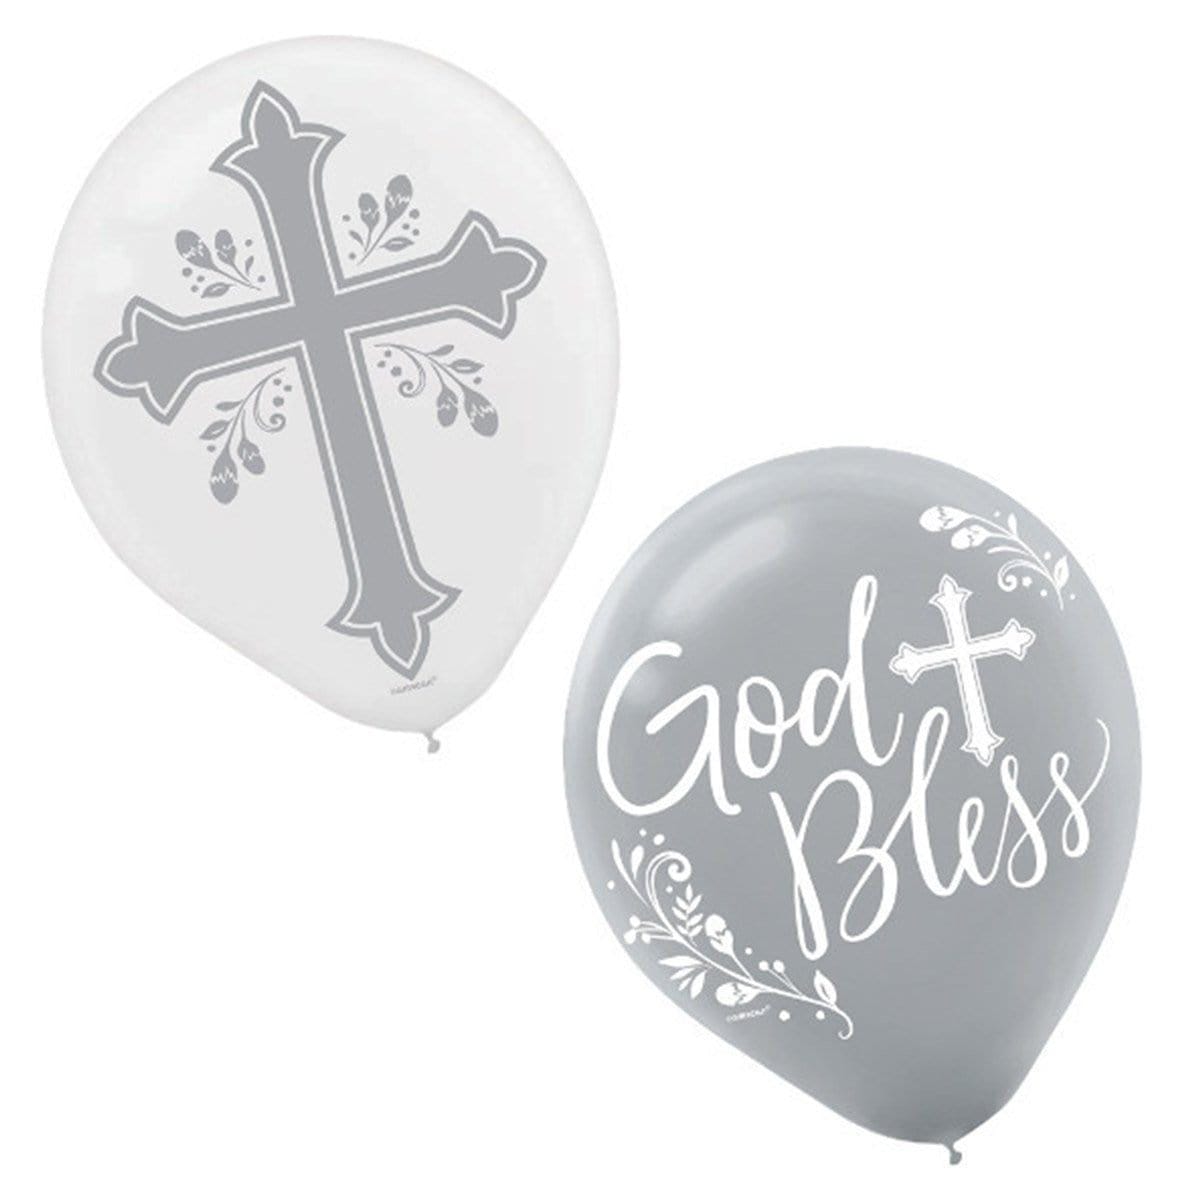 Buy Religious Holy Day - Latex Balloons 15/pkg sold at Party Expert